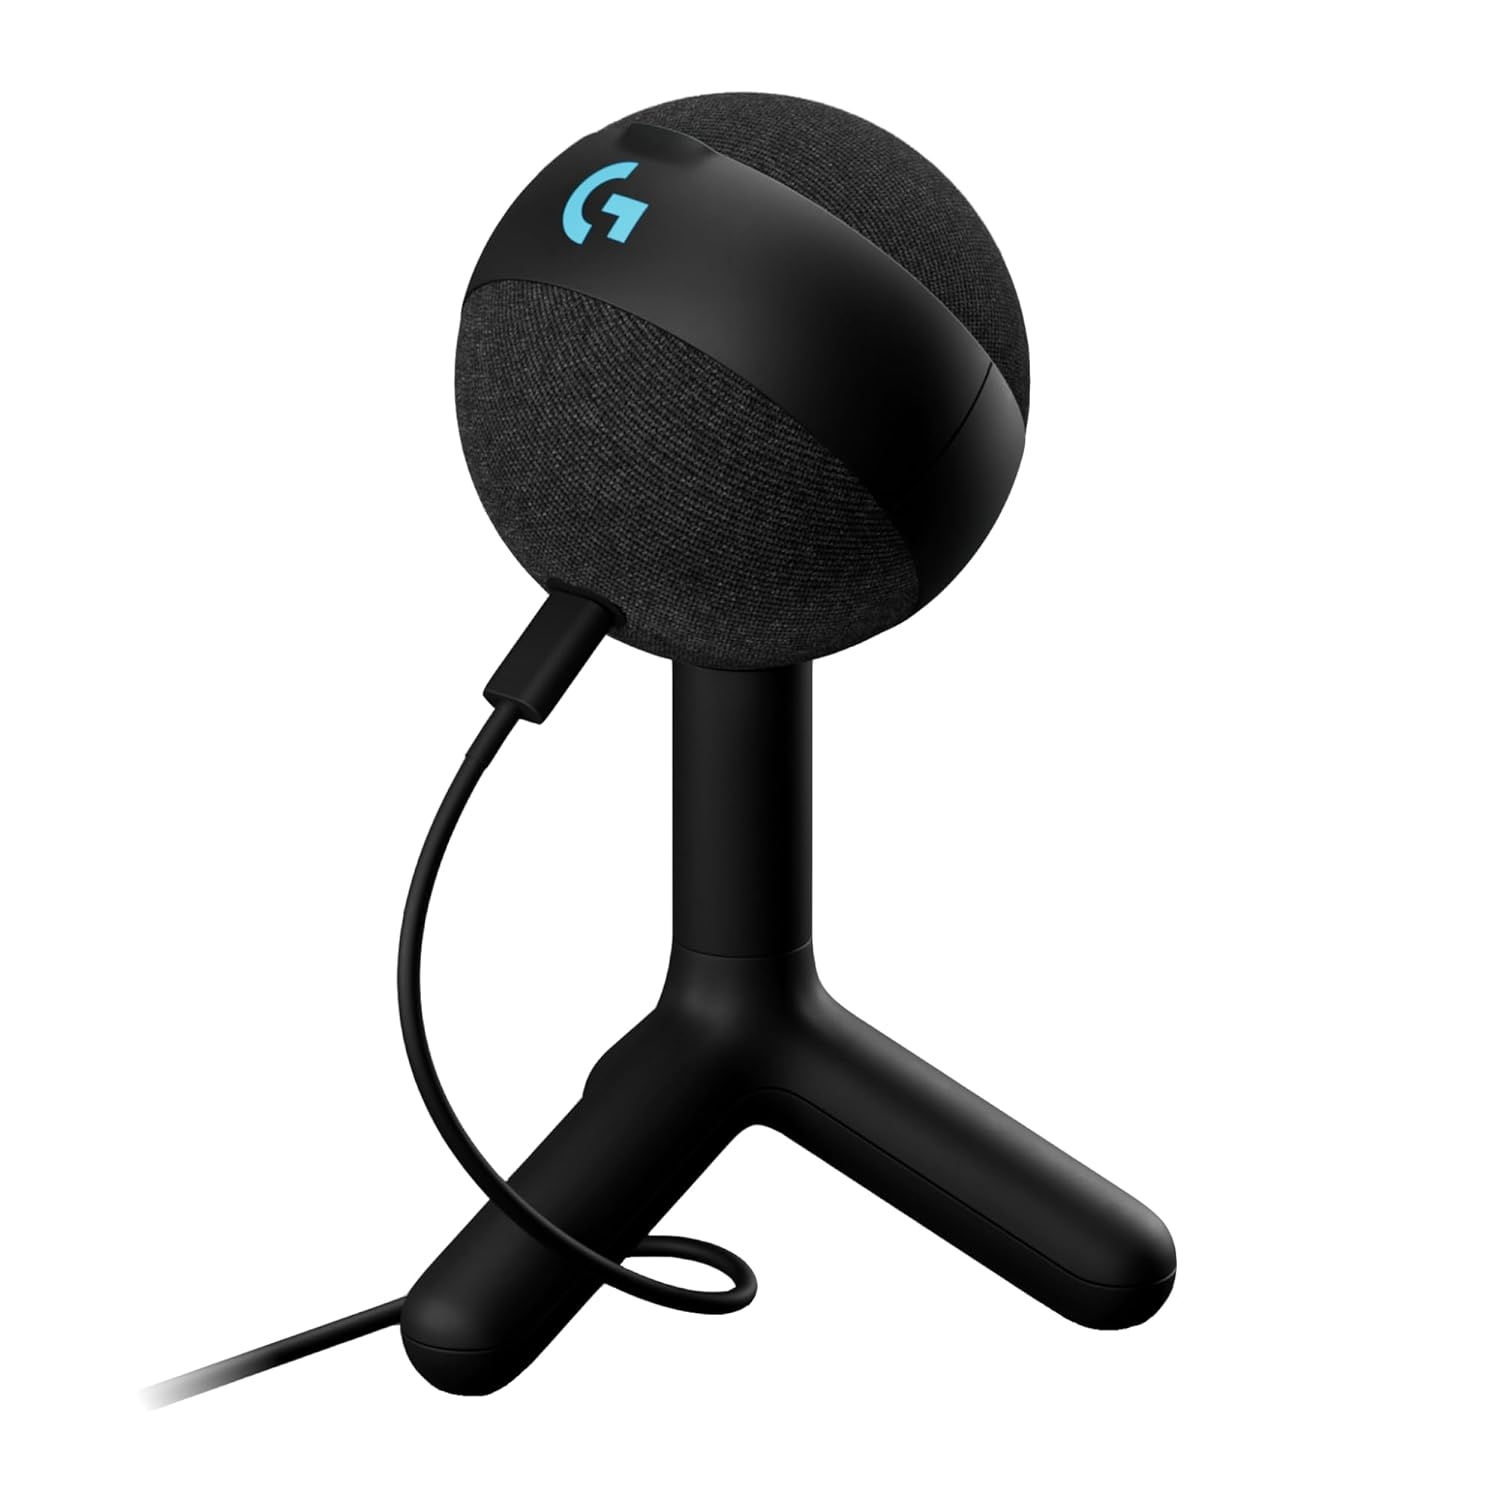 Logitech G Yeti Orb Condenser RGB Gaming Microphone with LIGHTSYNC, USB Mic for Streaming, Cardioid, USB Plug and Play for PC/Mac - Black Wired Microphones